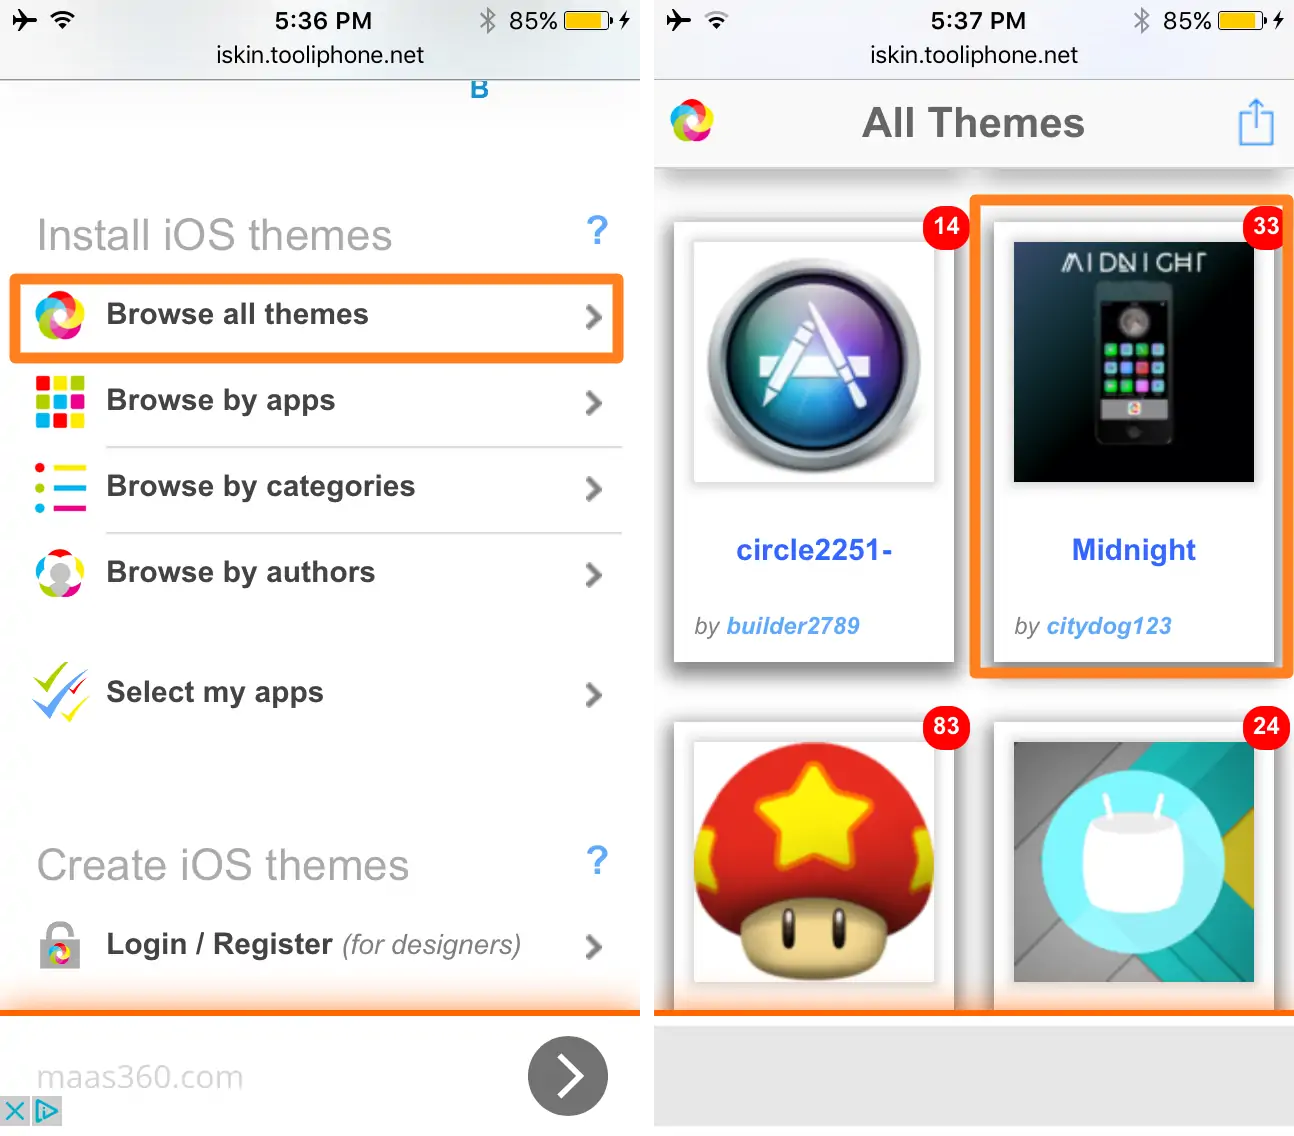 install themes on your iPhone without jailbreak